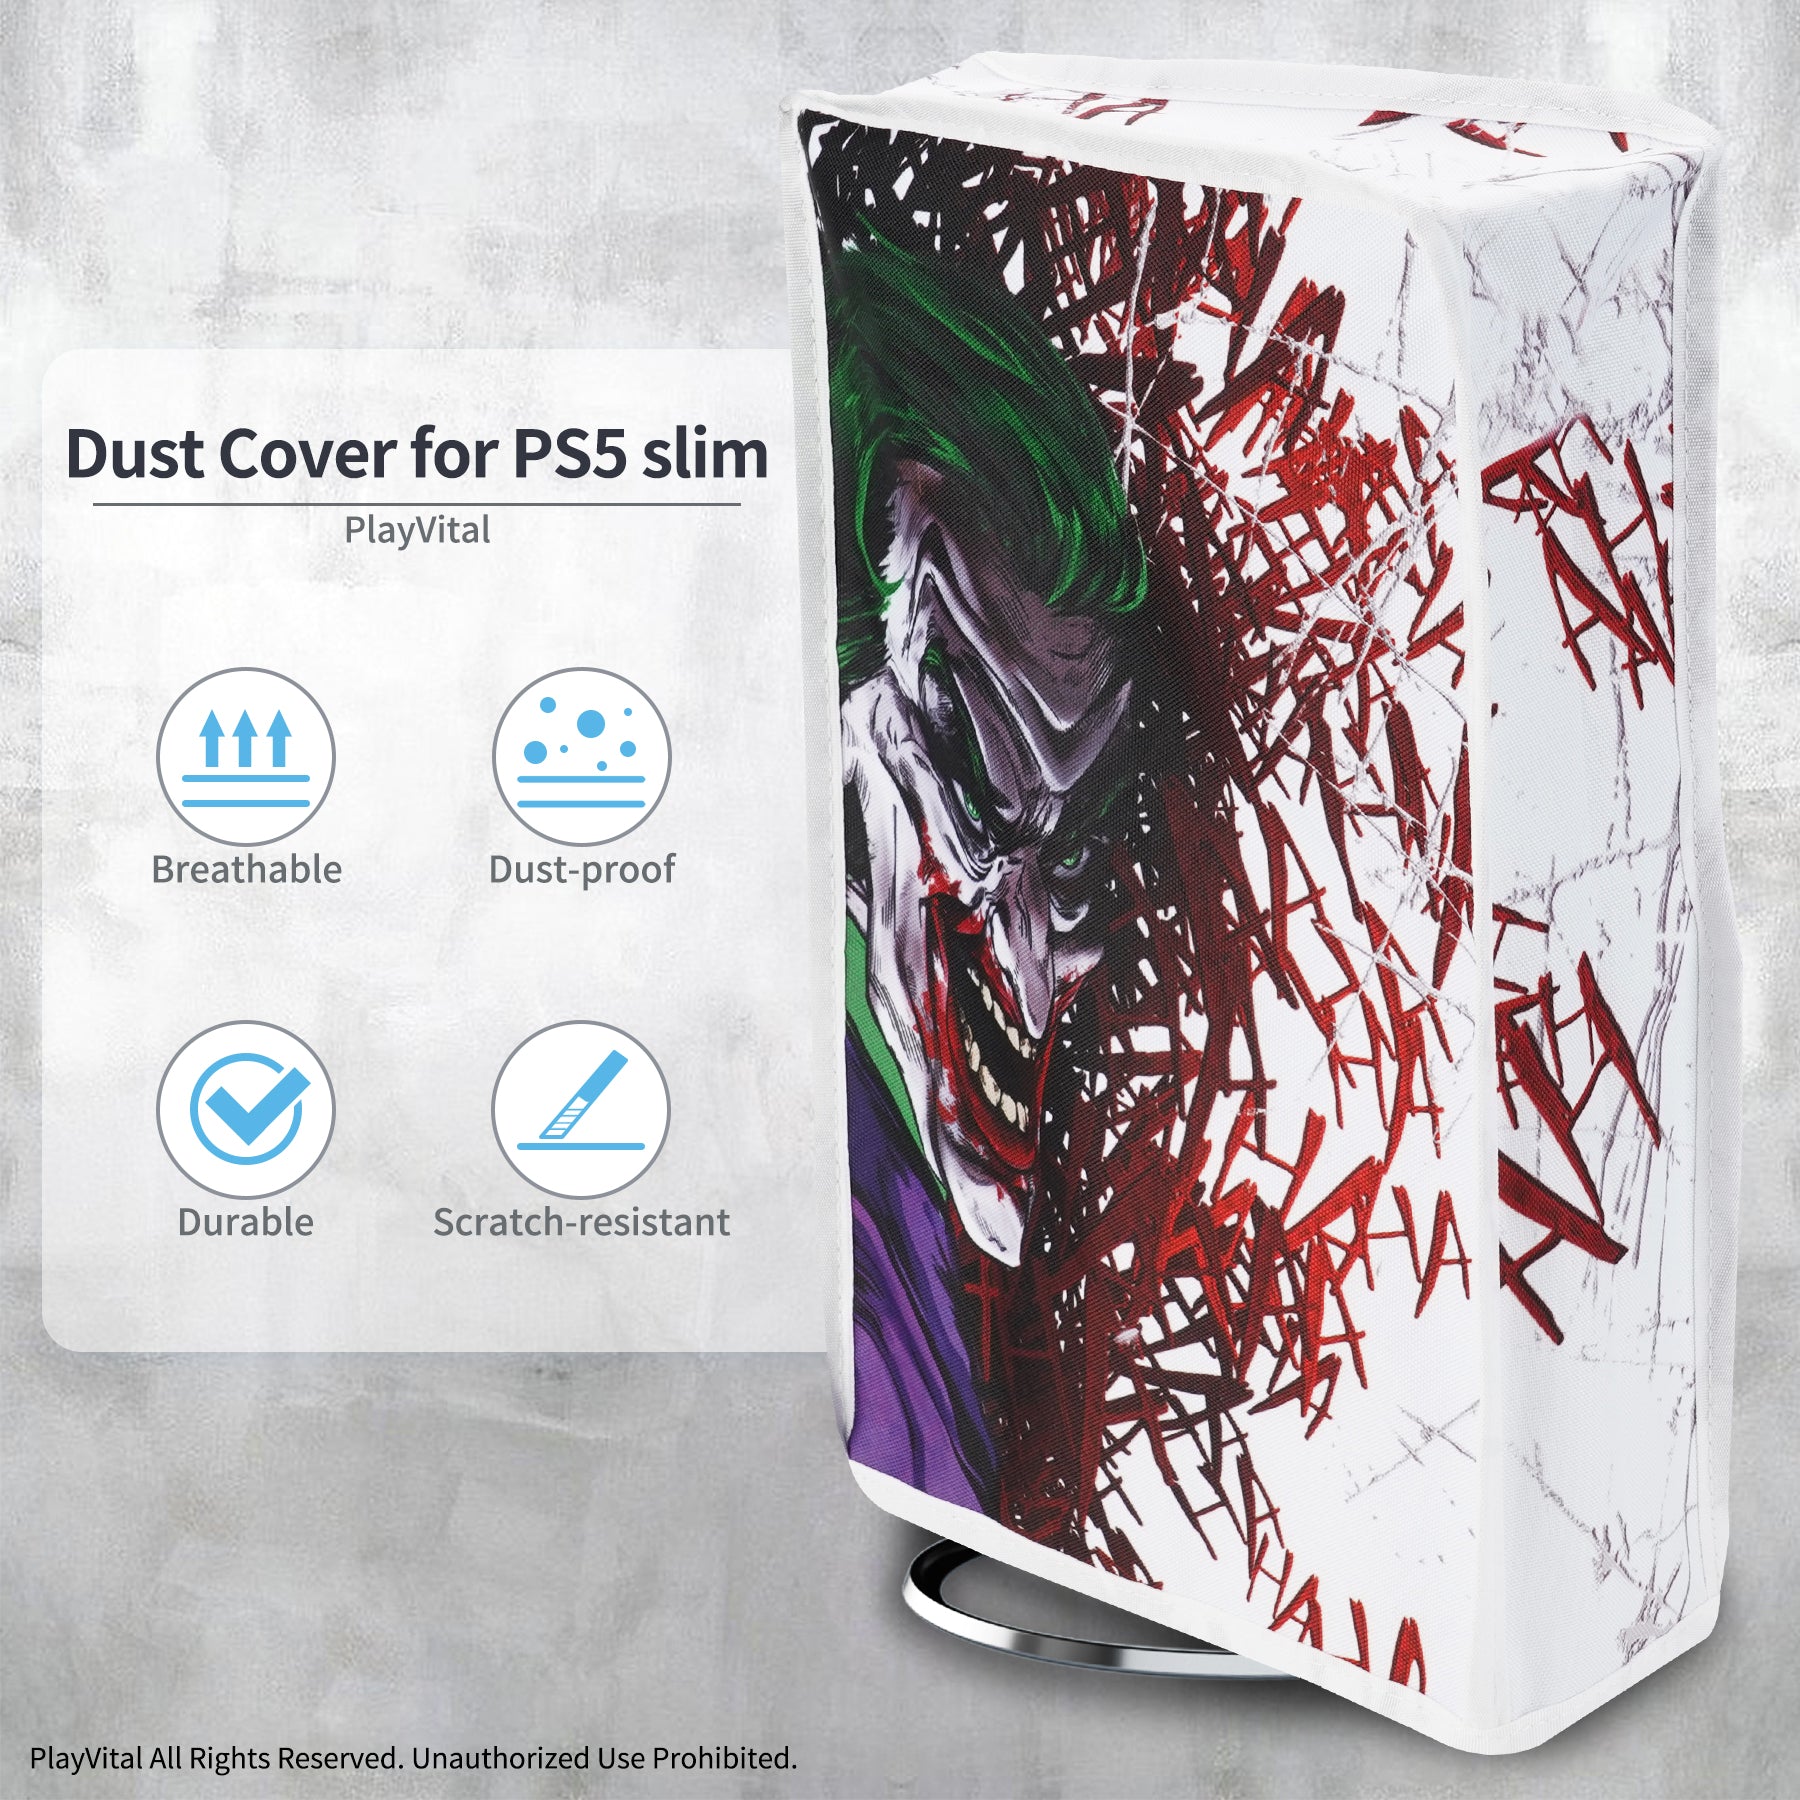 PlayVital Vertical Dust Cover for ps5 Slim Disc Edition(The New Smaller Design), Nylon Dust Proof Protector Waterproof Cover Sleeve for ps5 Slim Console - Clown Hahaha - BMYPFH002 PlayVital